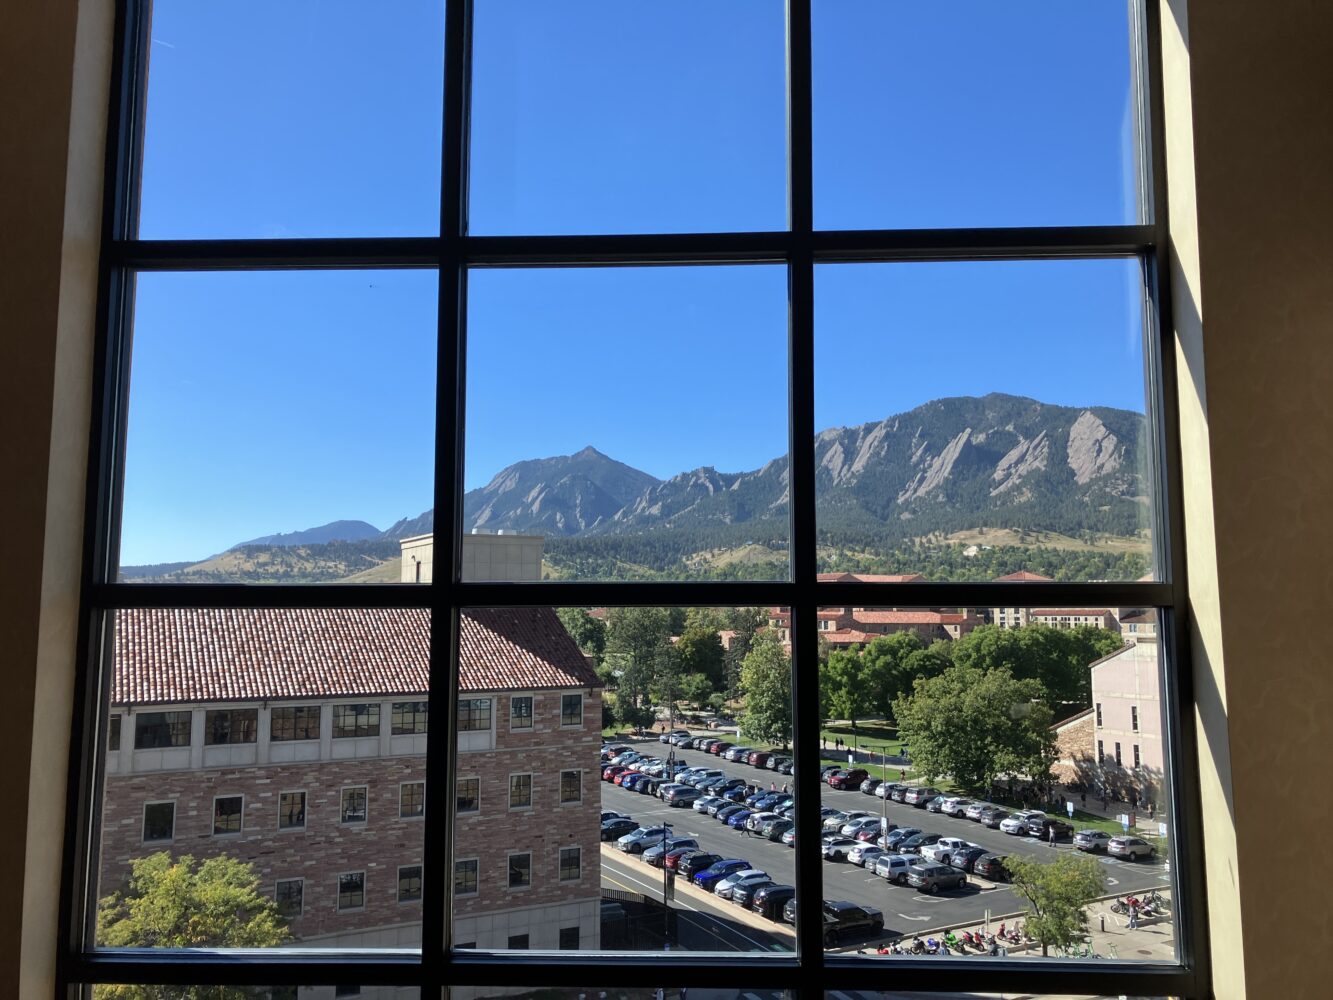 An image of downtown Boulder, Colorado taken from behind a window.